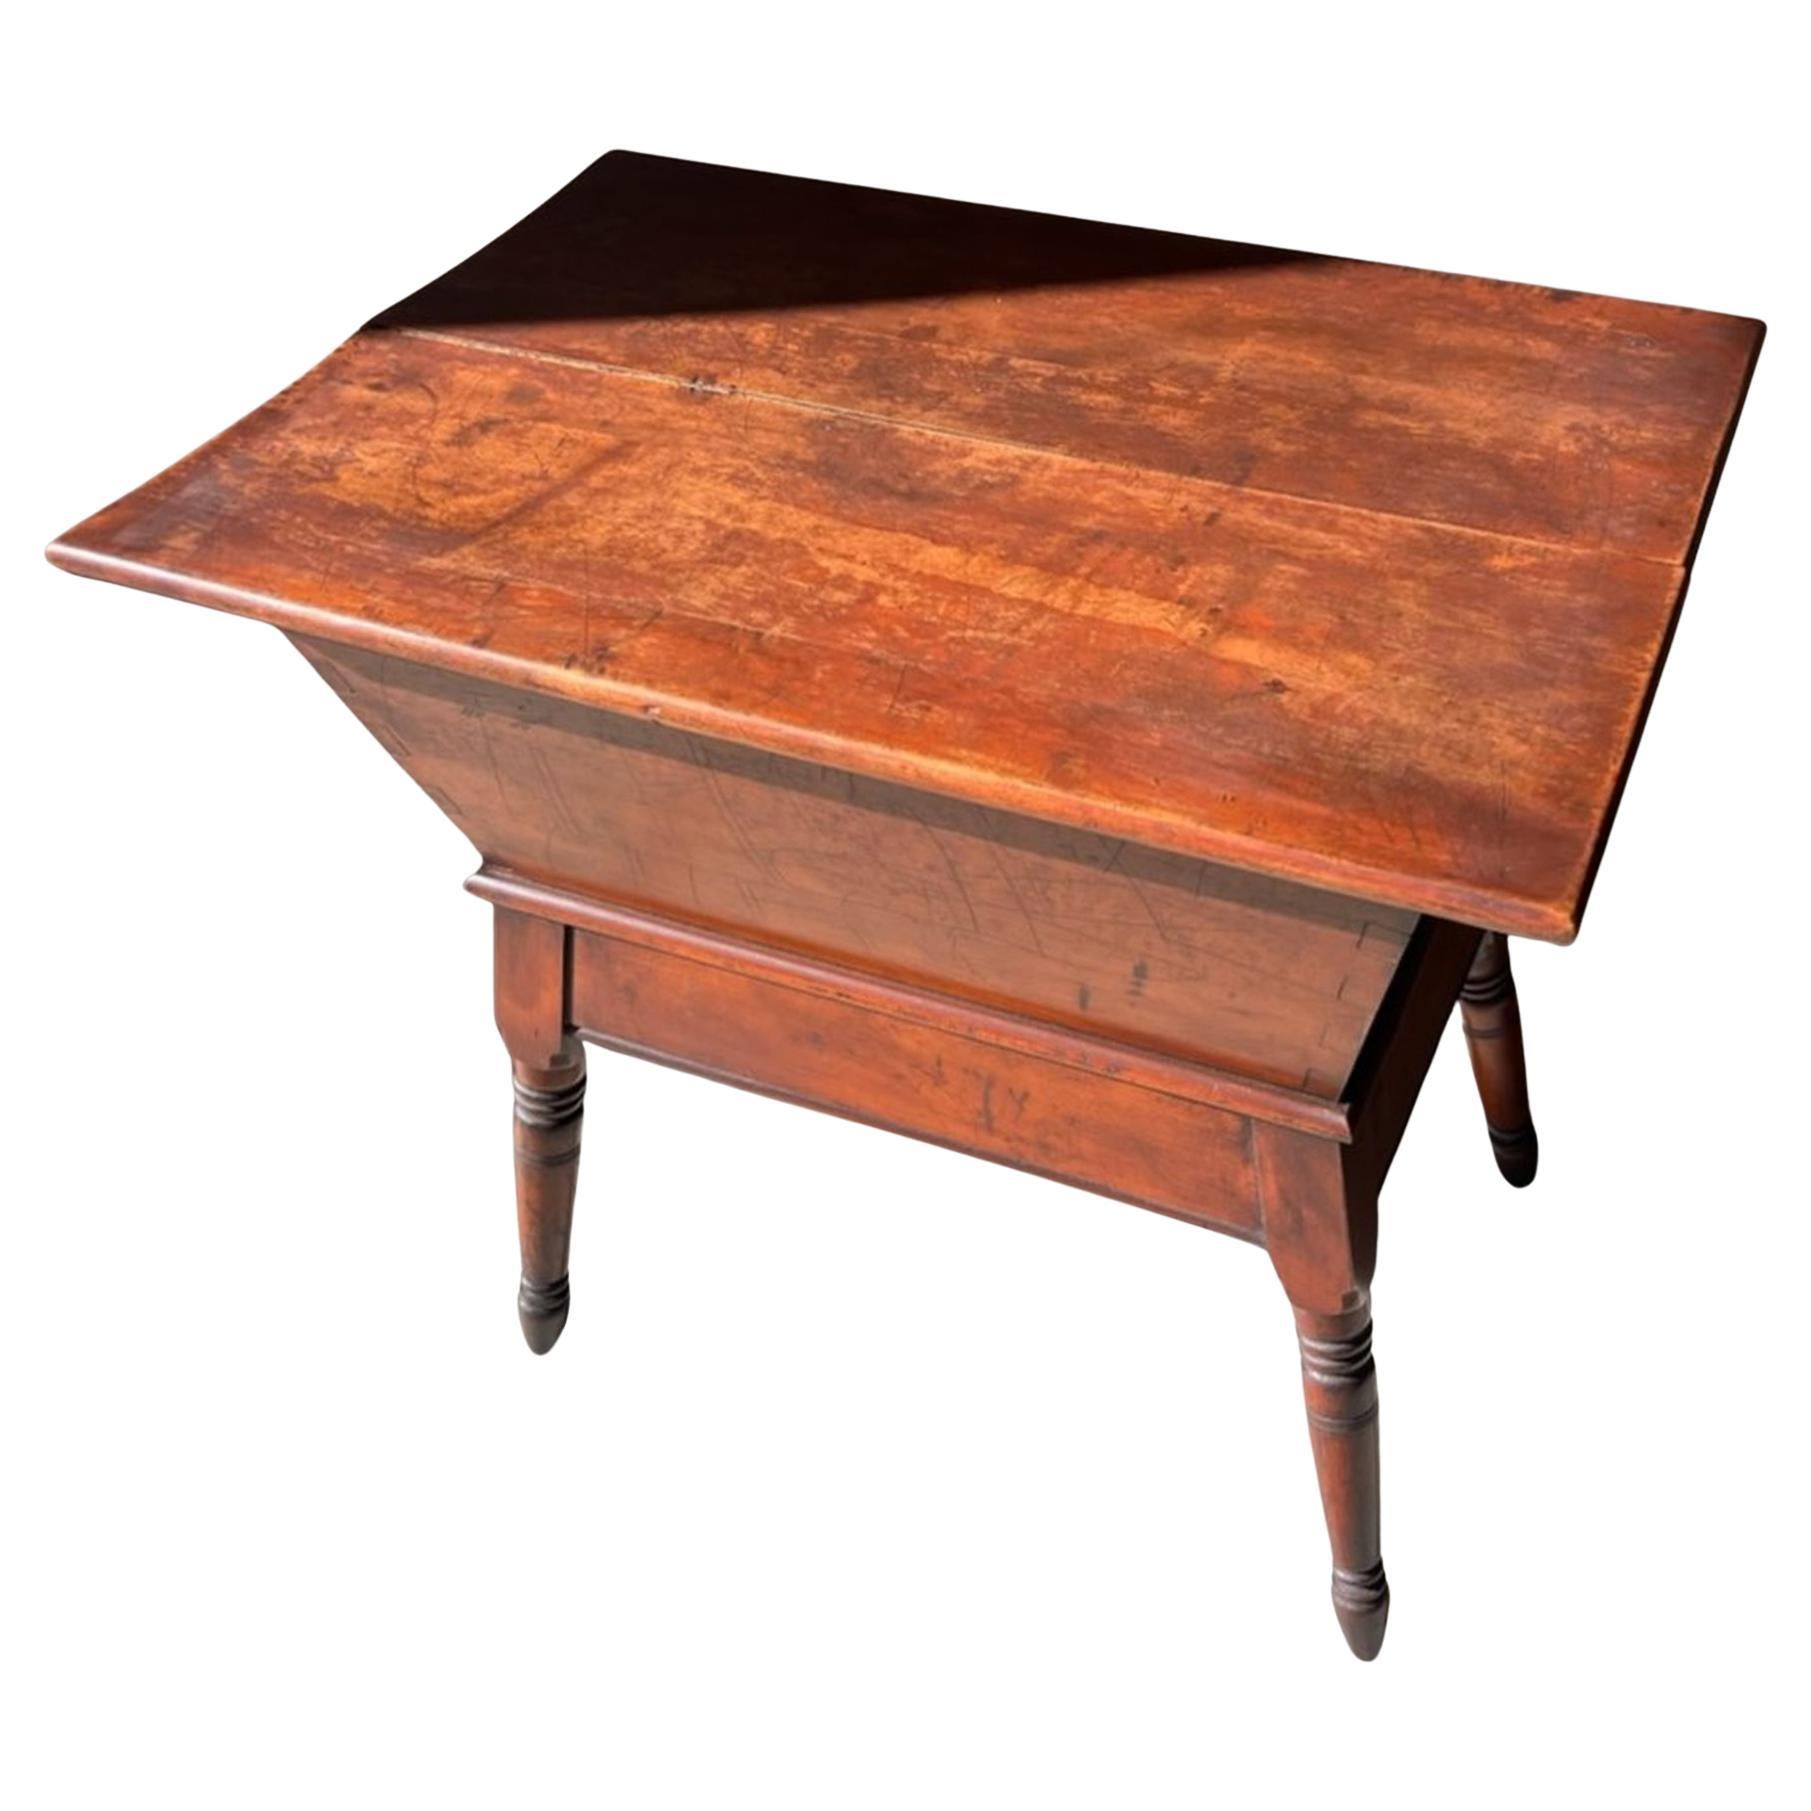 19Thc Dough tray - side table or end table stand with turned legs.The condition is so fine and dovetailed case.The walnut surface is beautiful patina.